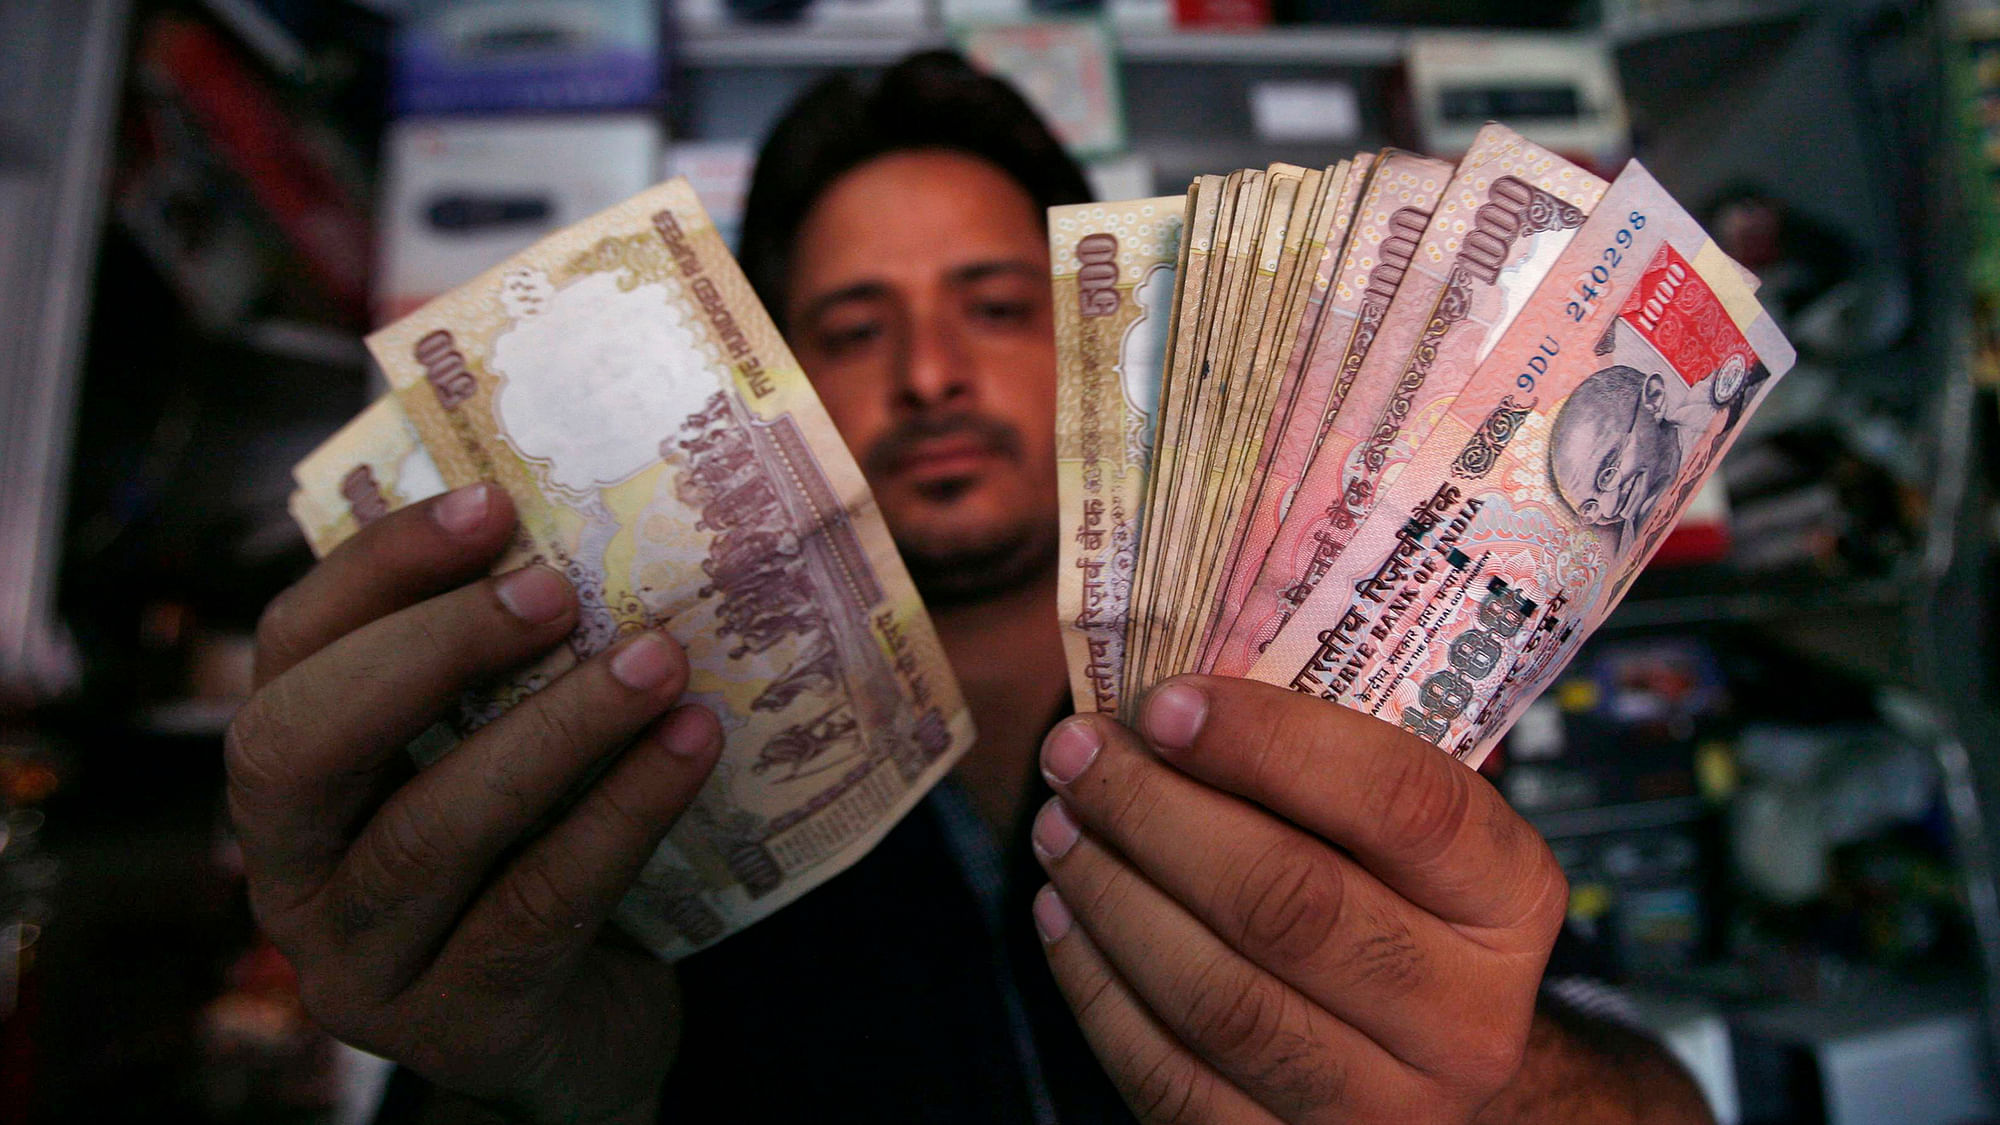 Prime Minister Modi’s 8 November announcement banned Rs 500 and Rs 1,000 notes as legal tender. (Photo: Reuters)